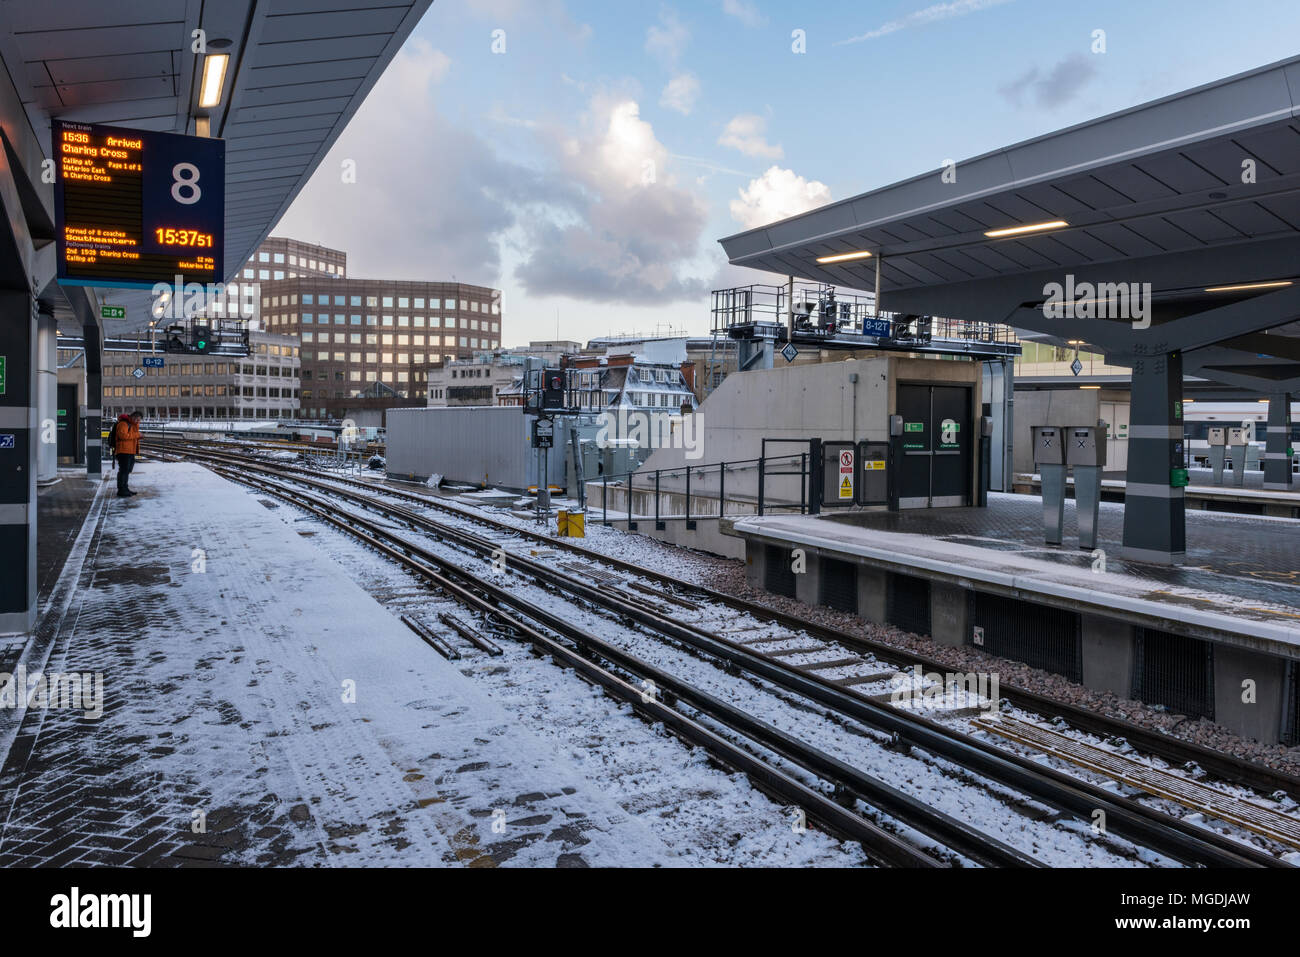 a solitary person stands alone on a platform at the new london bridge railway station in the freezing snow in mid winter. waiting for a train in snow. Stock Photo